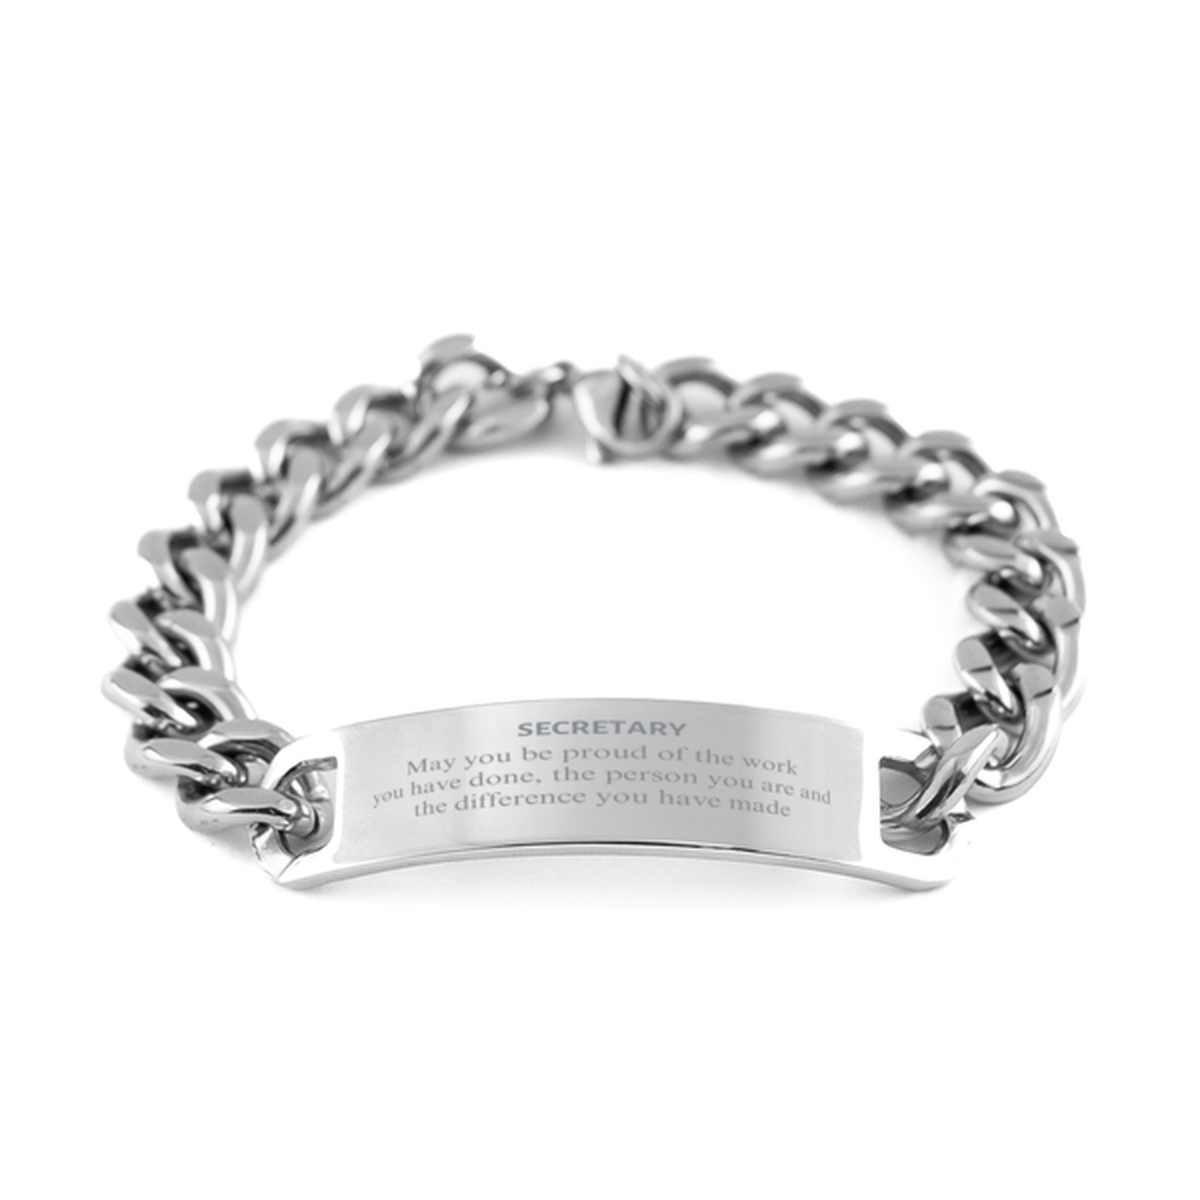 Secretary May you be proud of the work you have done, Retirement Secretary Cuban Chain Stainless Steel Bracelet for Colleague Appreciation Gifts Amazing for Secretary